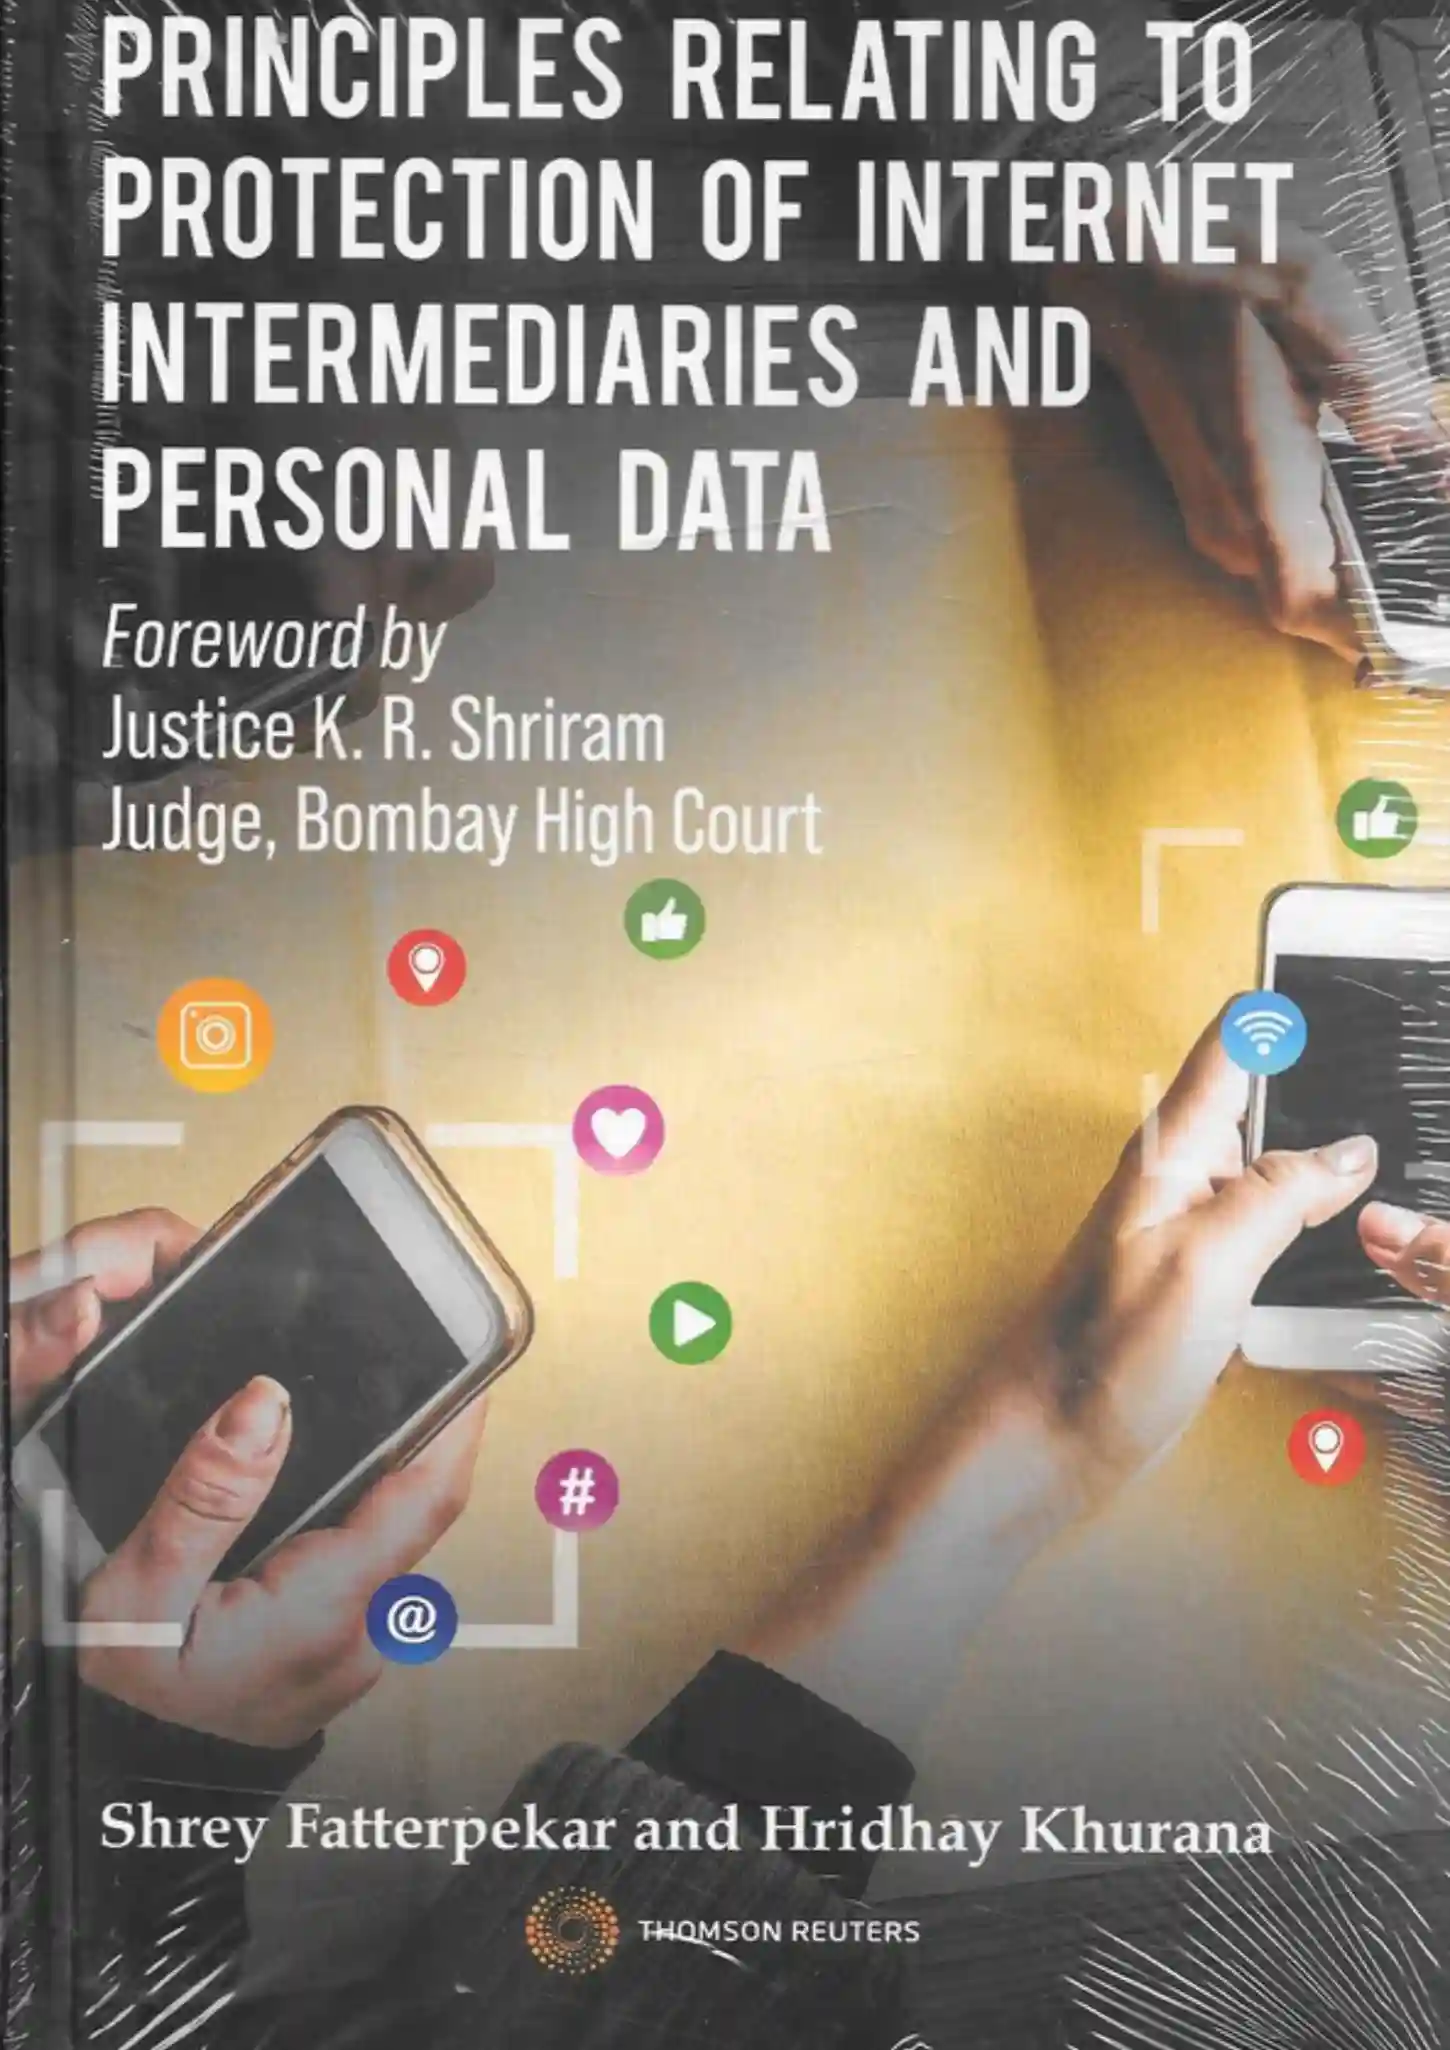 Principles Relating to Protection of Internet Intermediaries and Personal Data